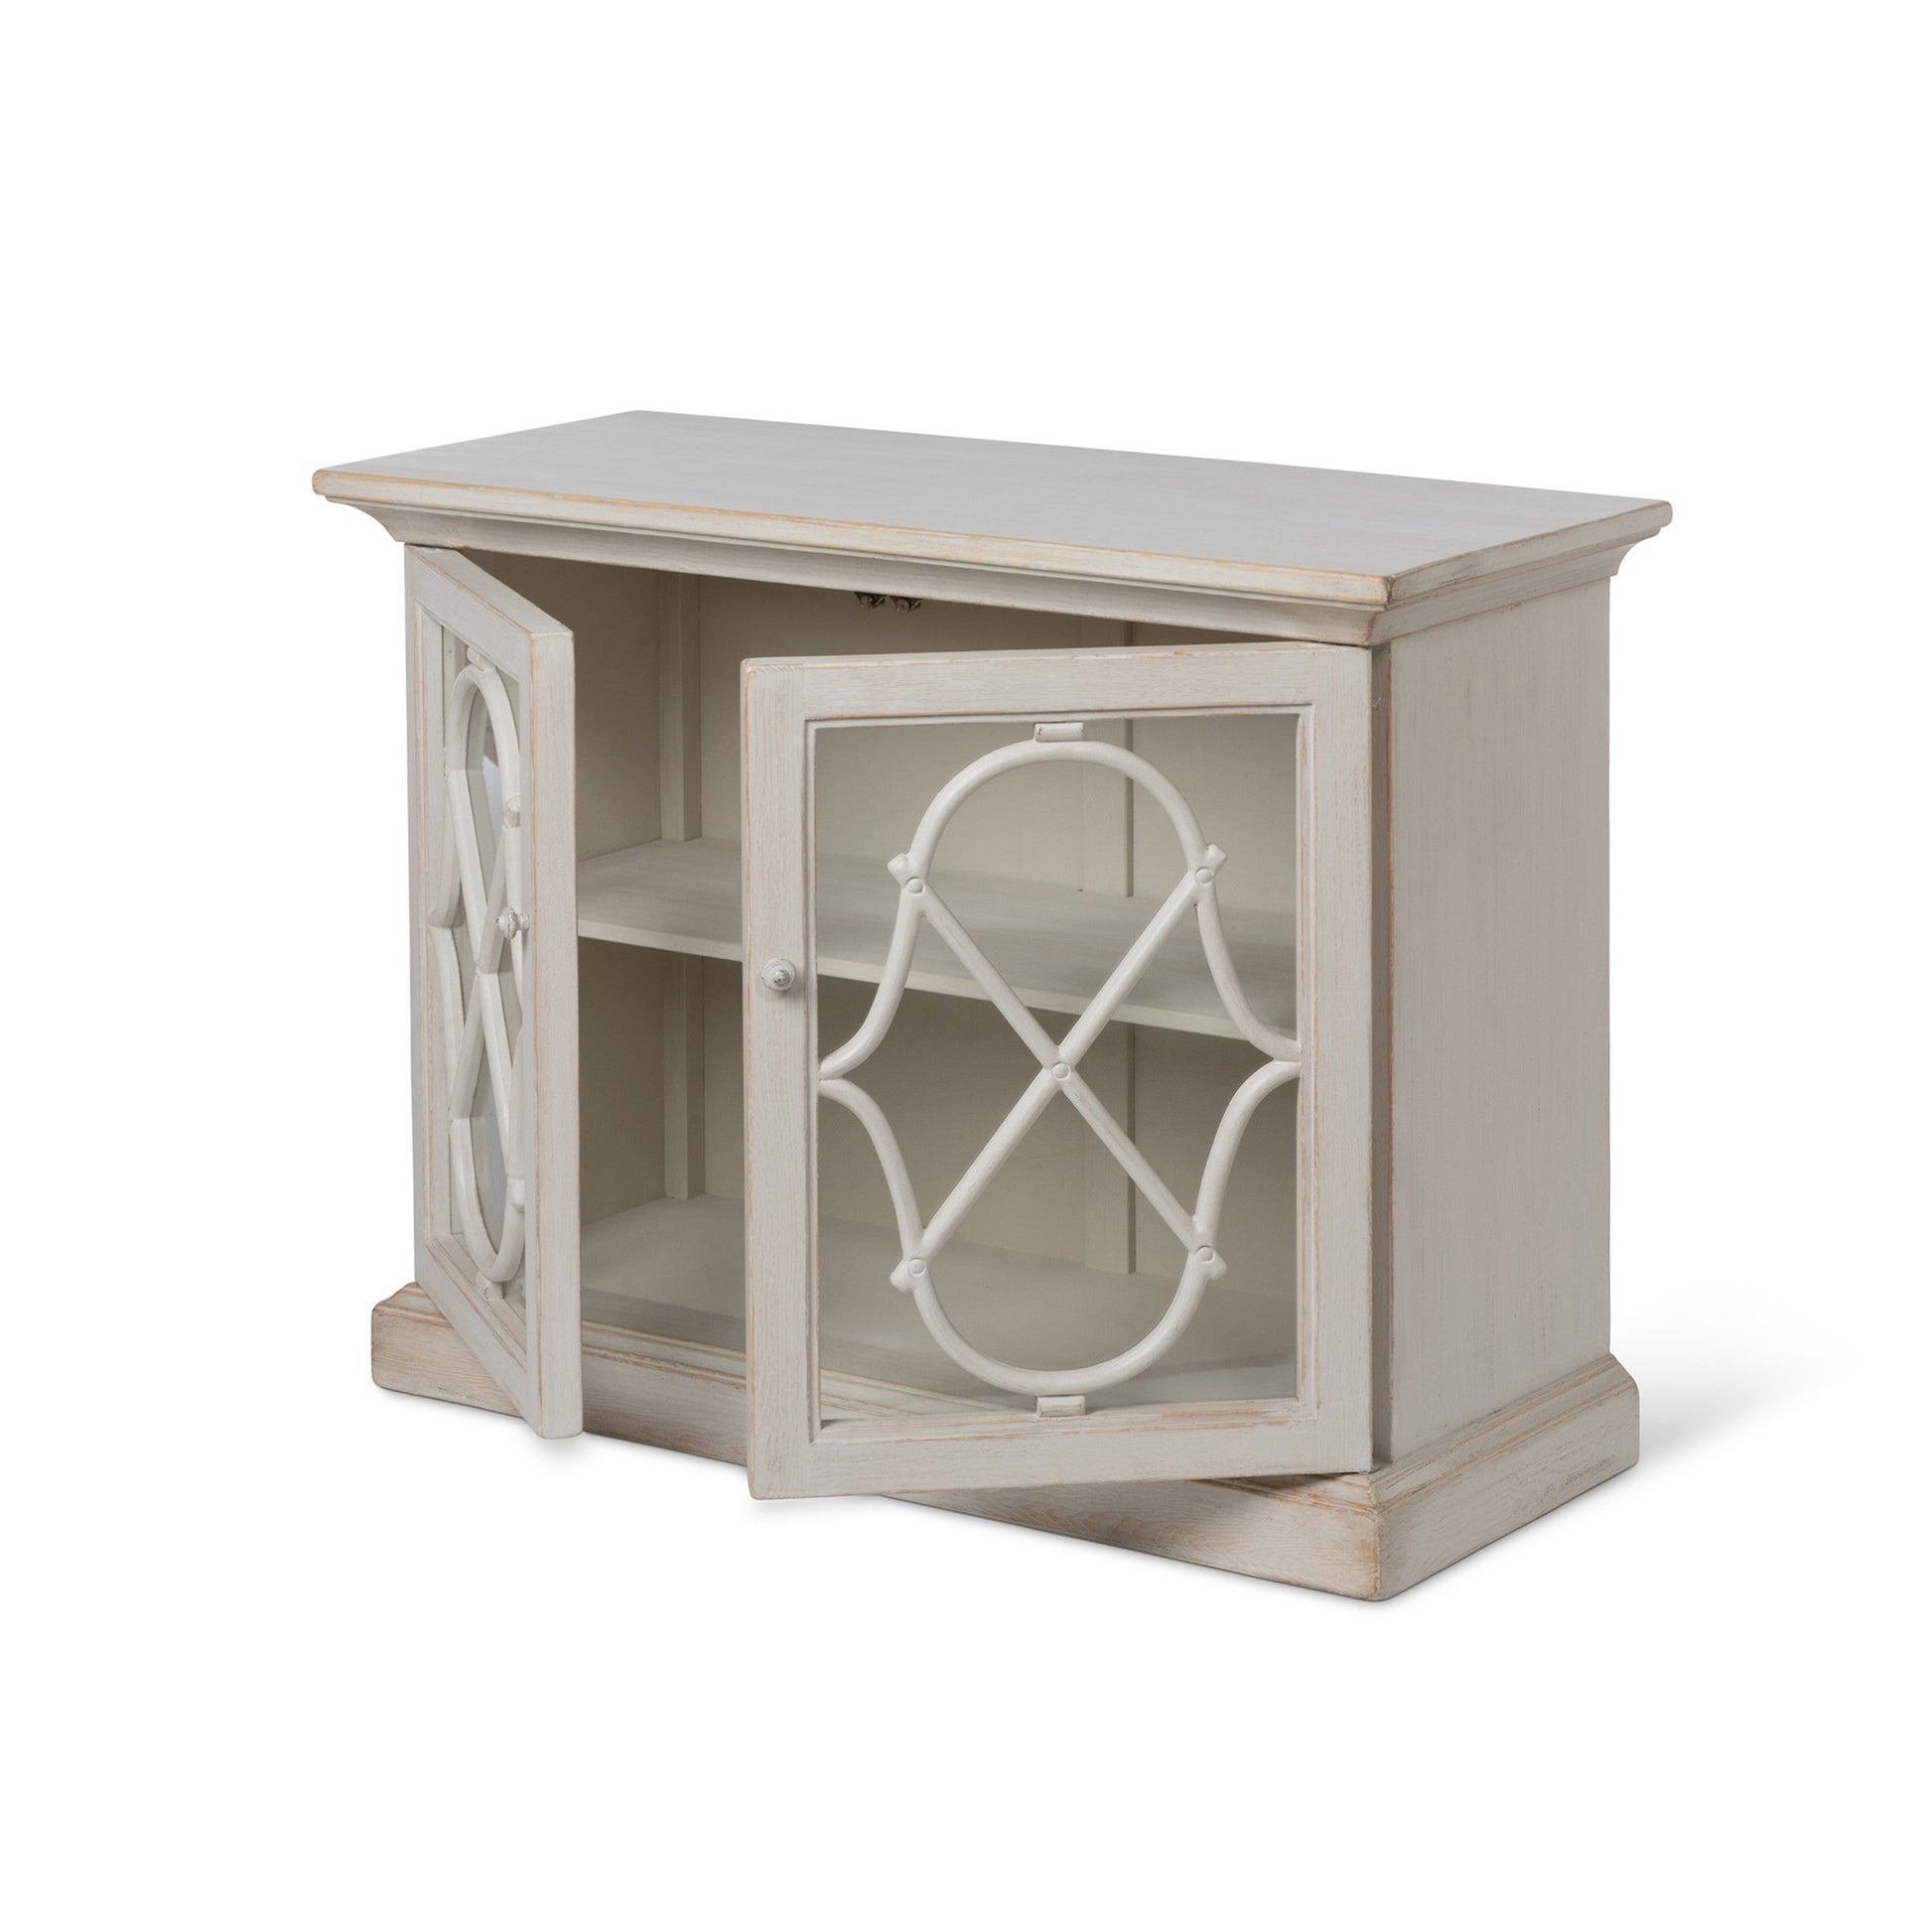 the-addie-wood-console-with-glass-doors-console-table-park-hill-4-Threadbare Gypsy Soul